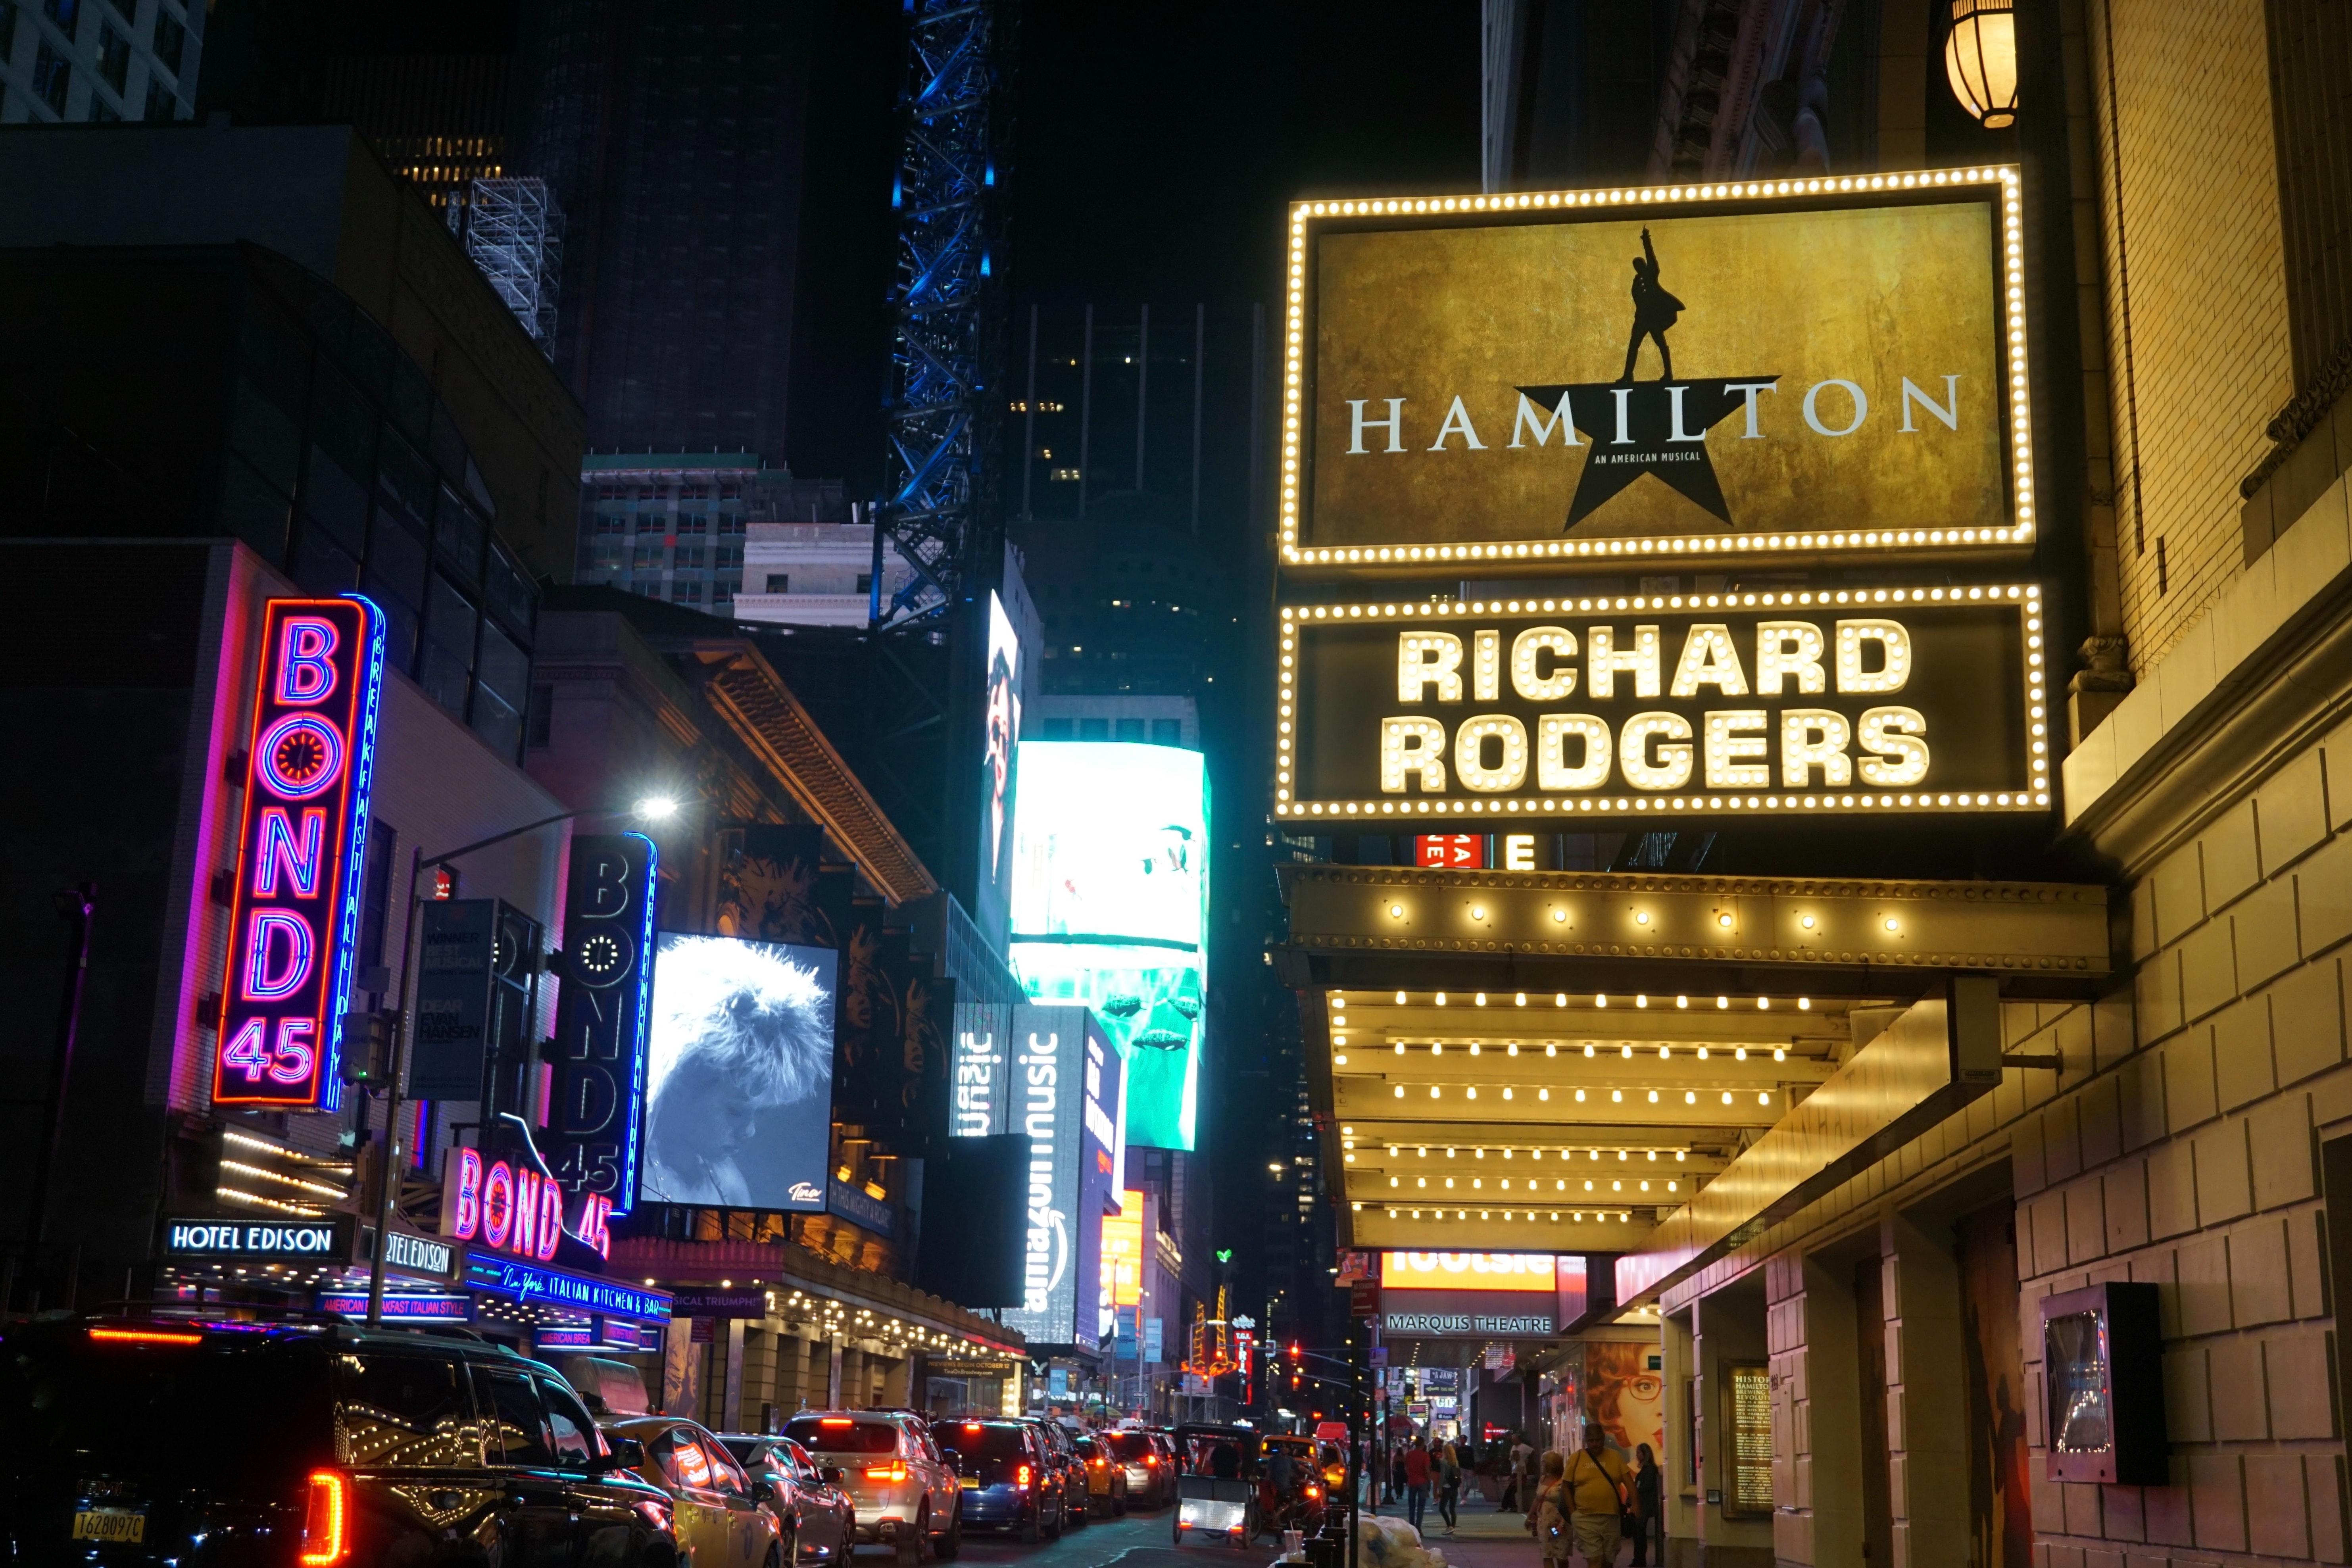 Now is the best time to see Hamilton